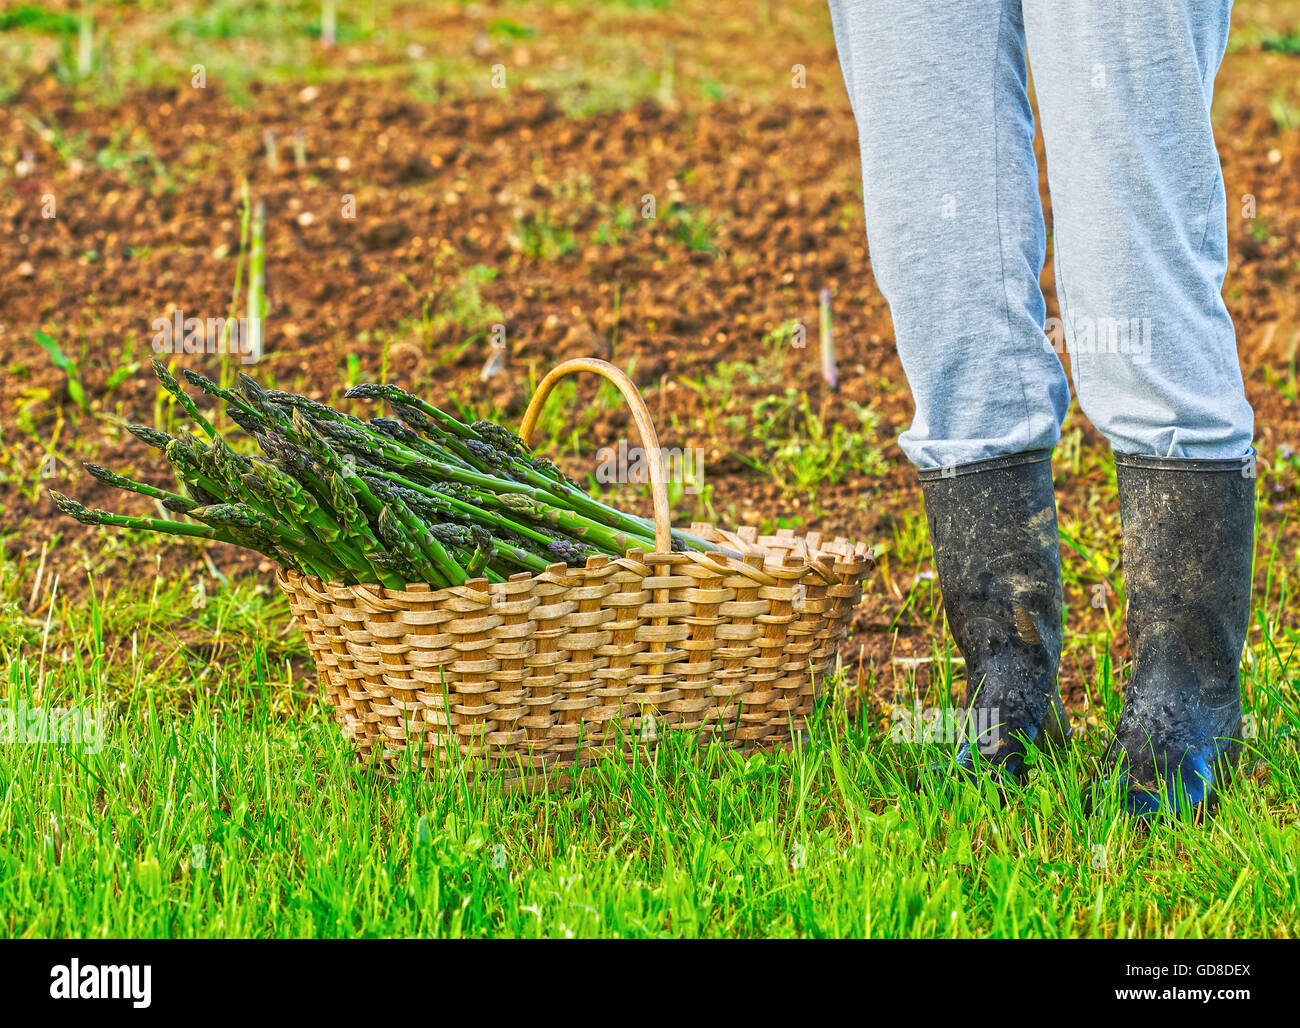 Healthy asparagus picked by someone in the garden. Stock Photo